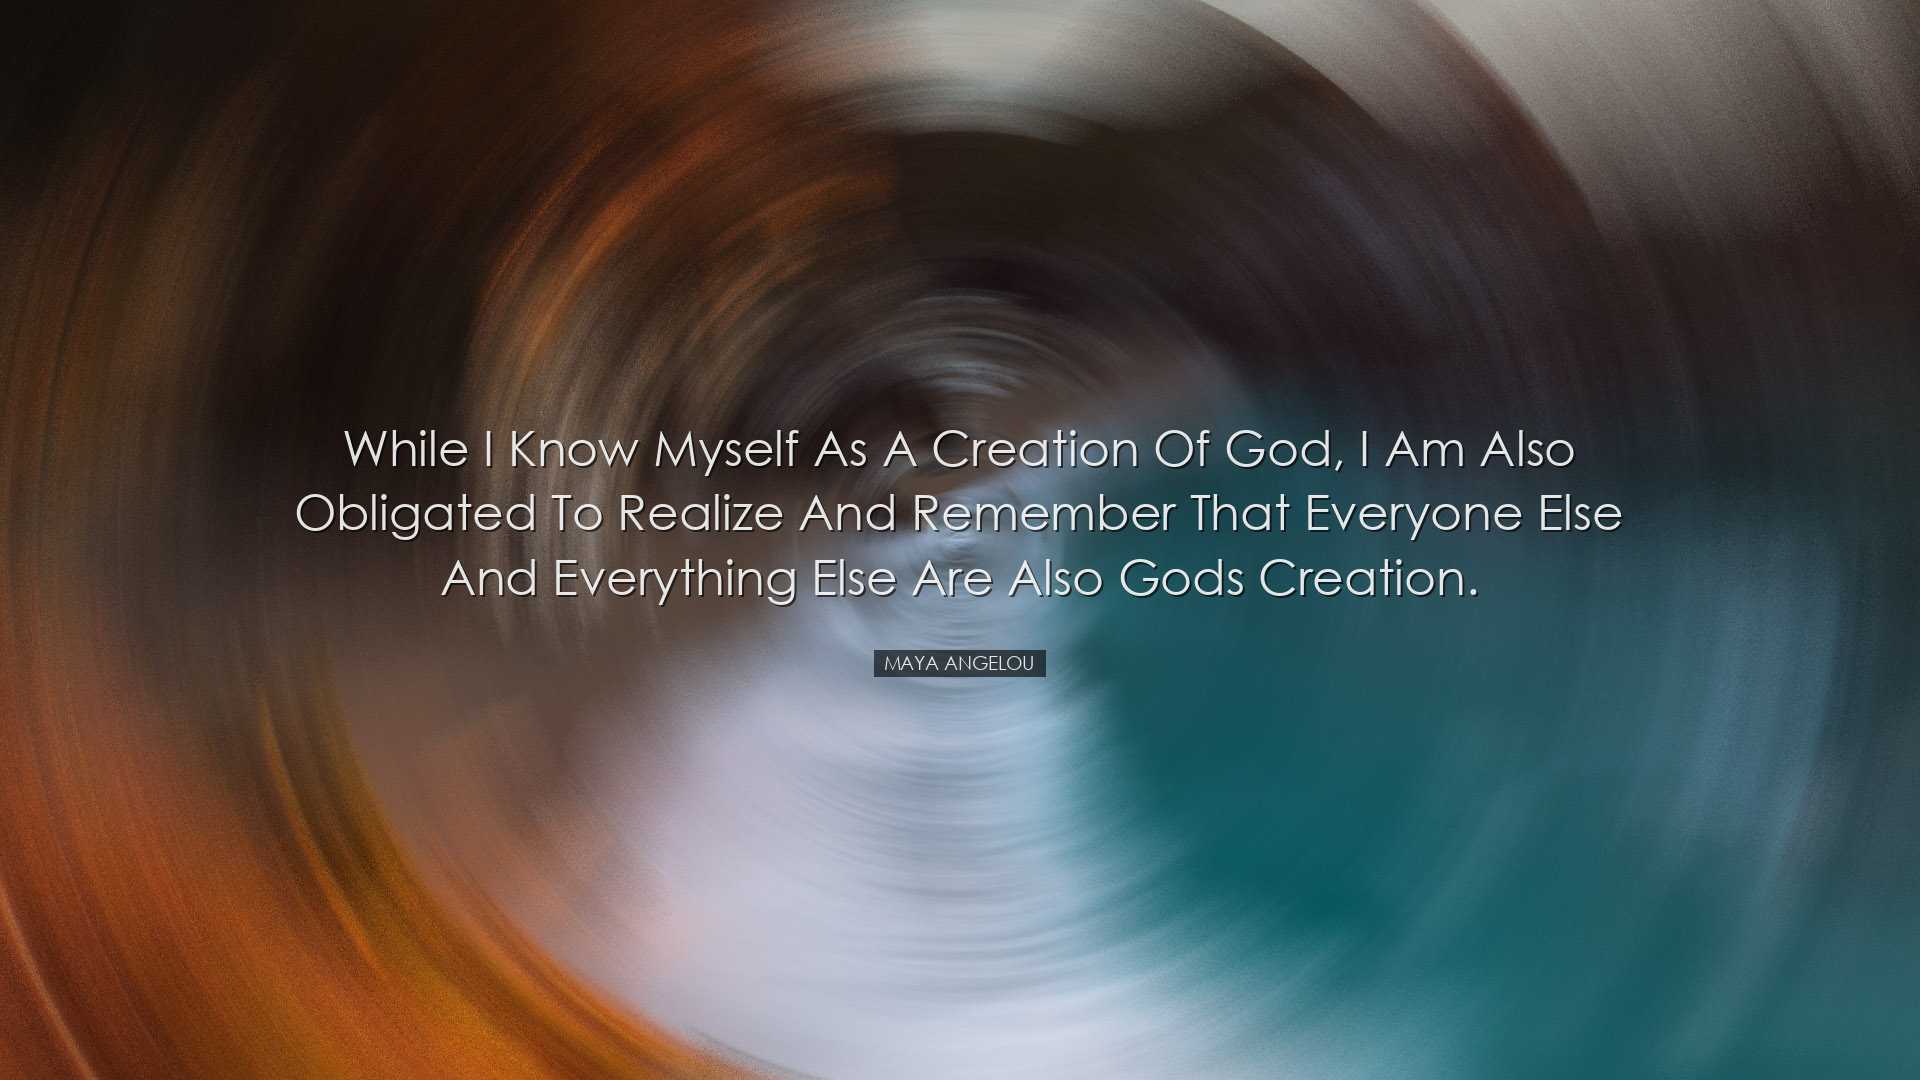 While I know myself as a creation of God, I am also obligated to r